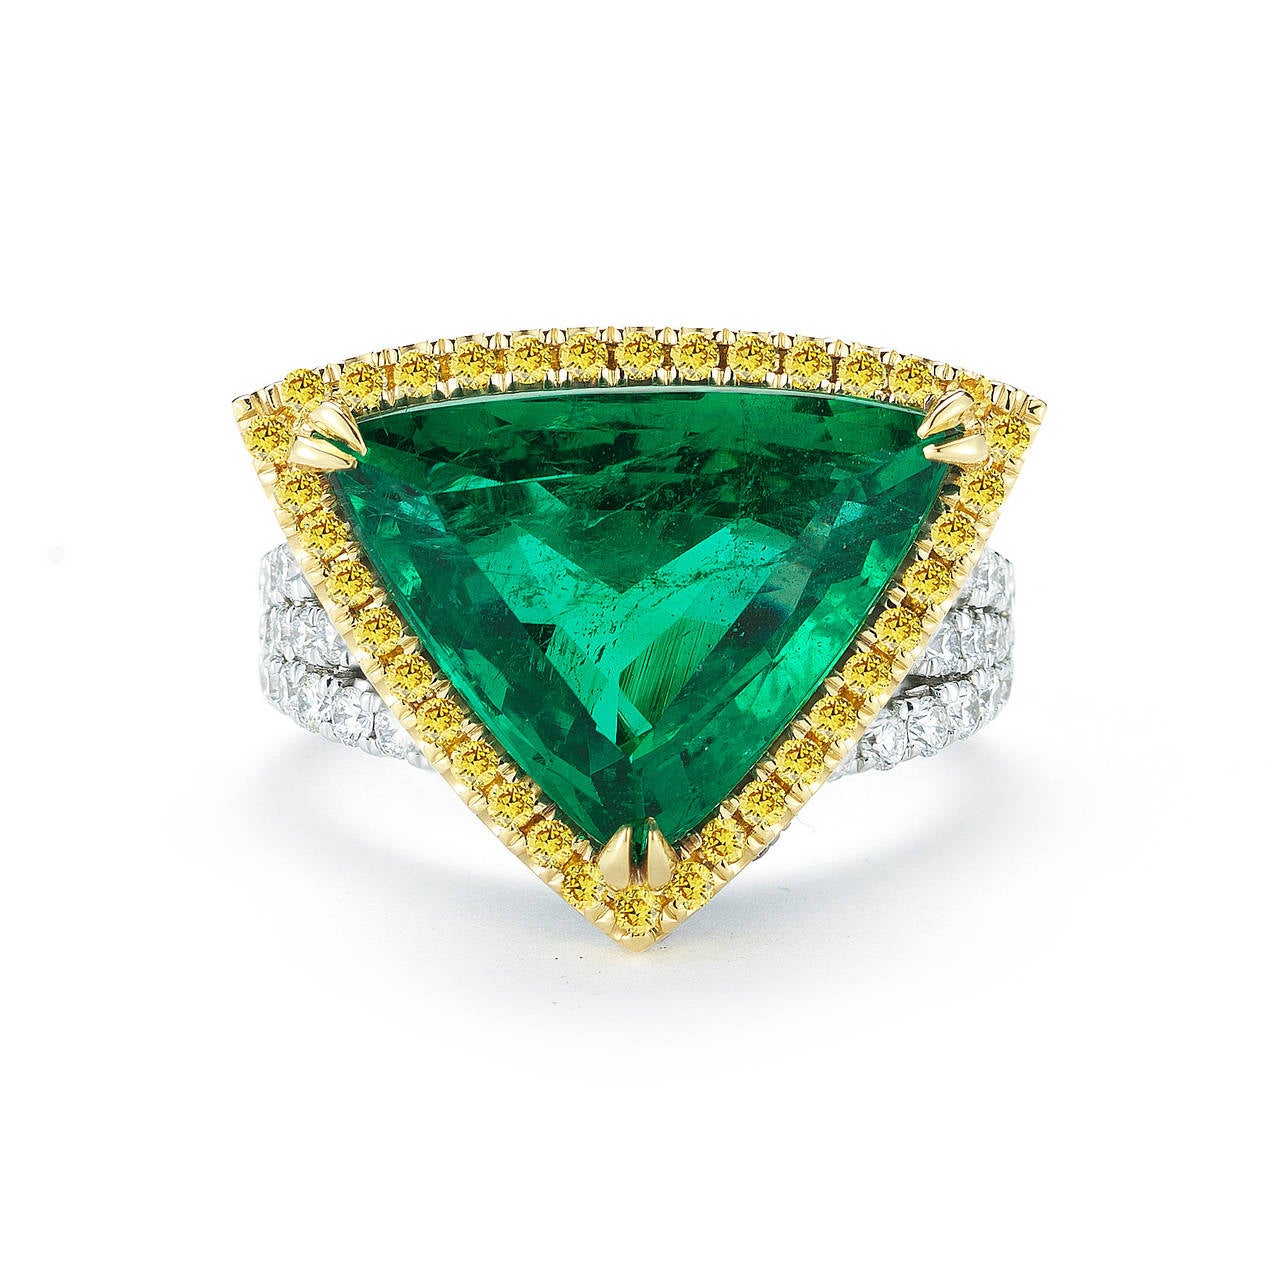 Amazing Zambian Emerald Trillion Shape Ring With Fancy Yellow And White Diamonds. This Emerald is Certified By GIA (F2).
Product ID:02378
Model:TK MB 529
Metal:18K W
Gram Weight:9.20
Stock:1
Ring Size:7
Country Of Origin:USA
* Resize your